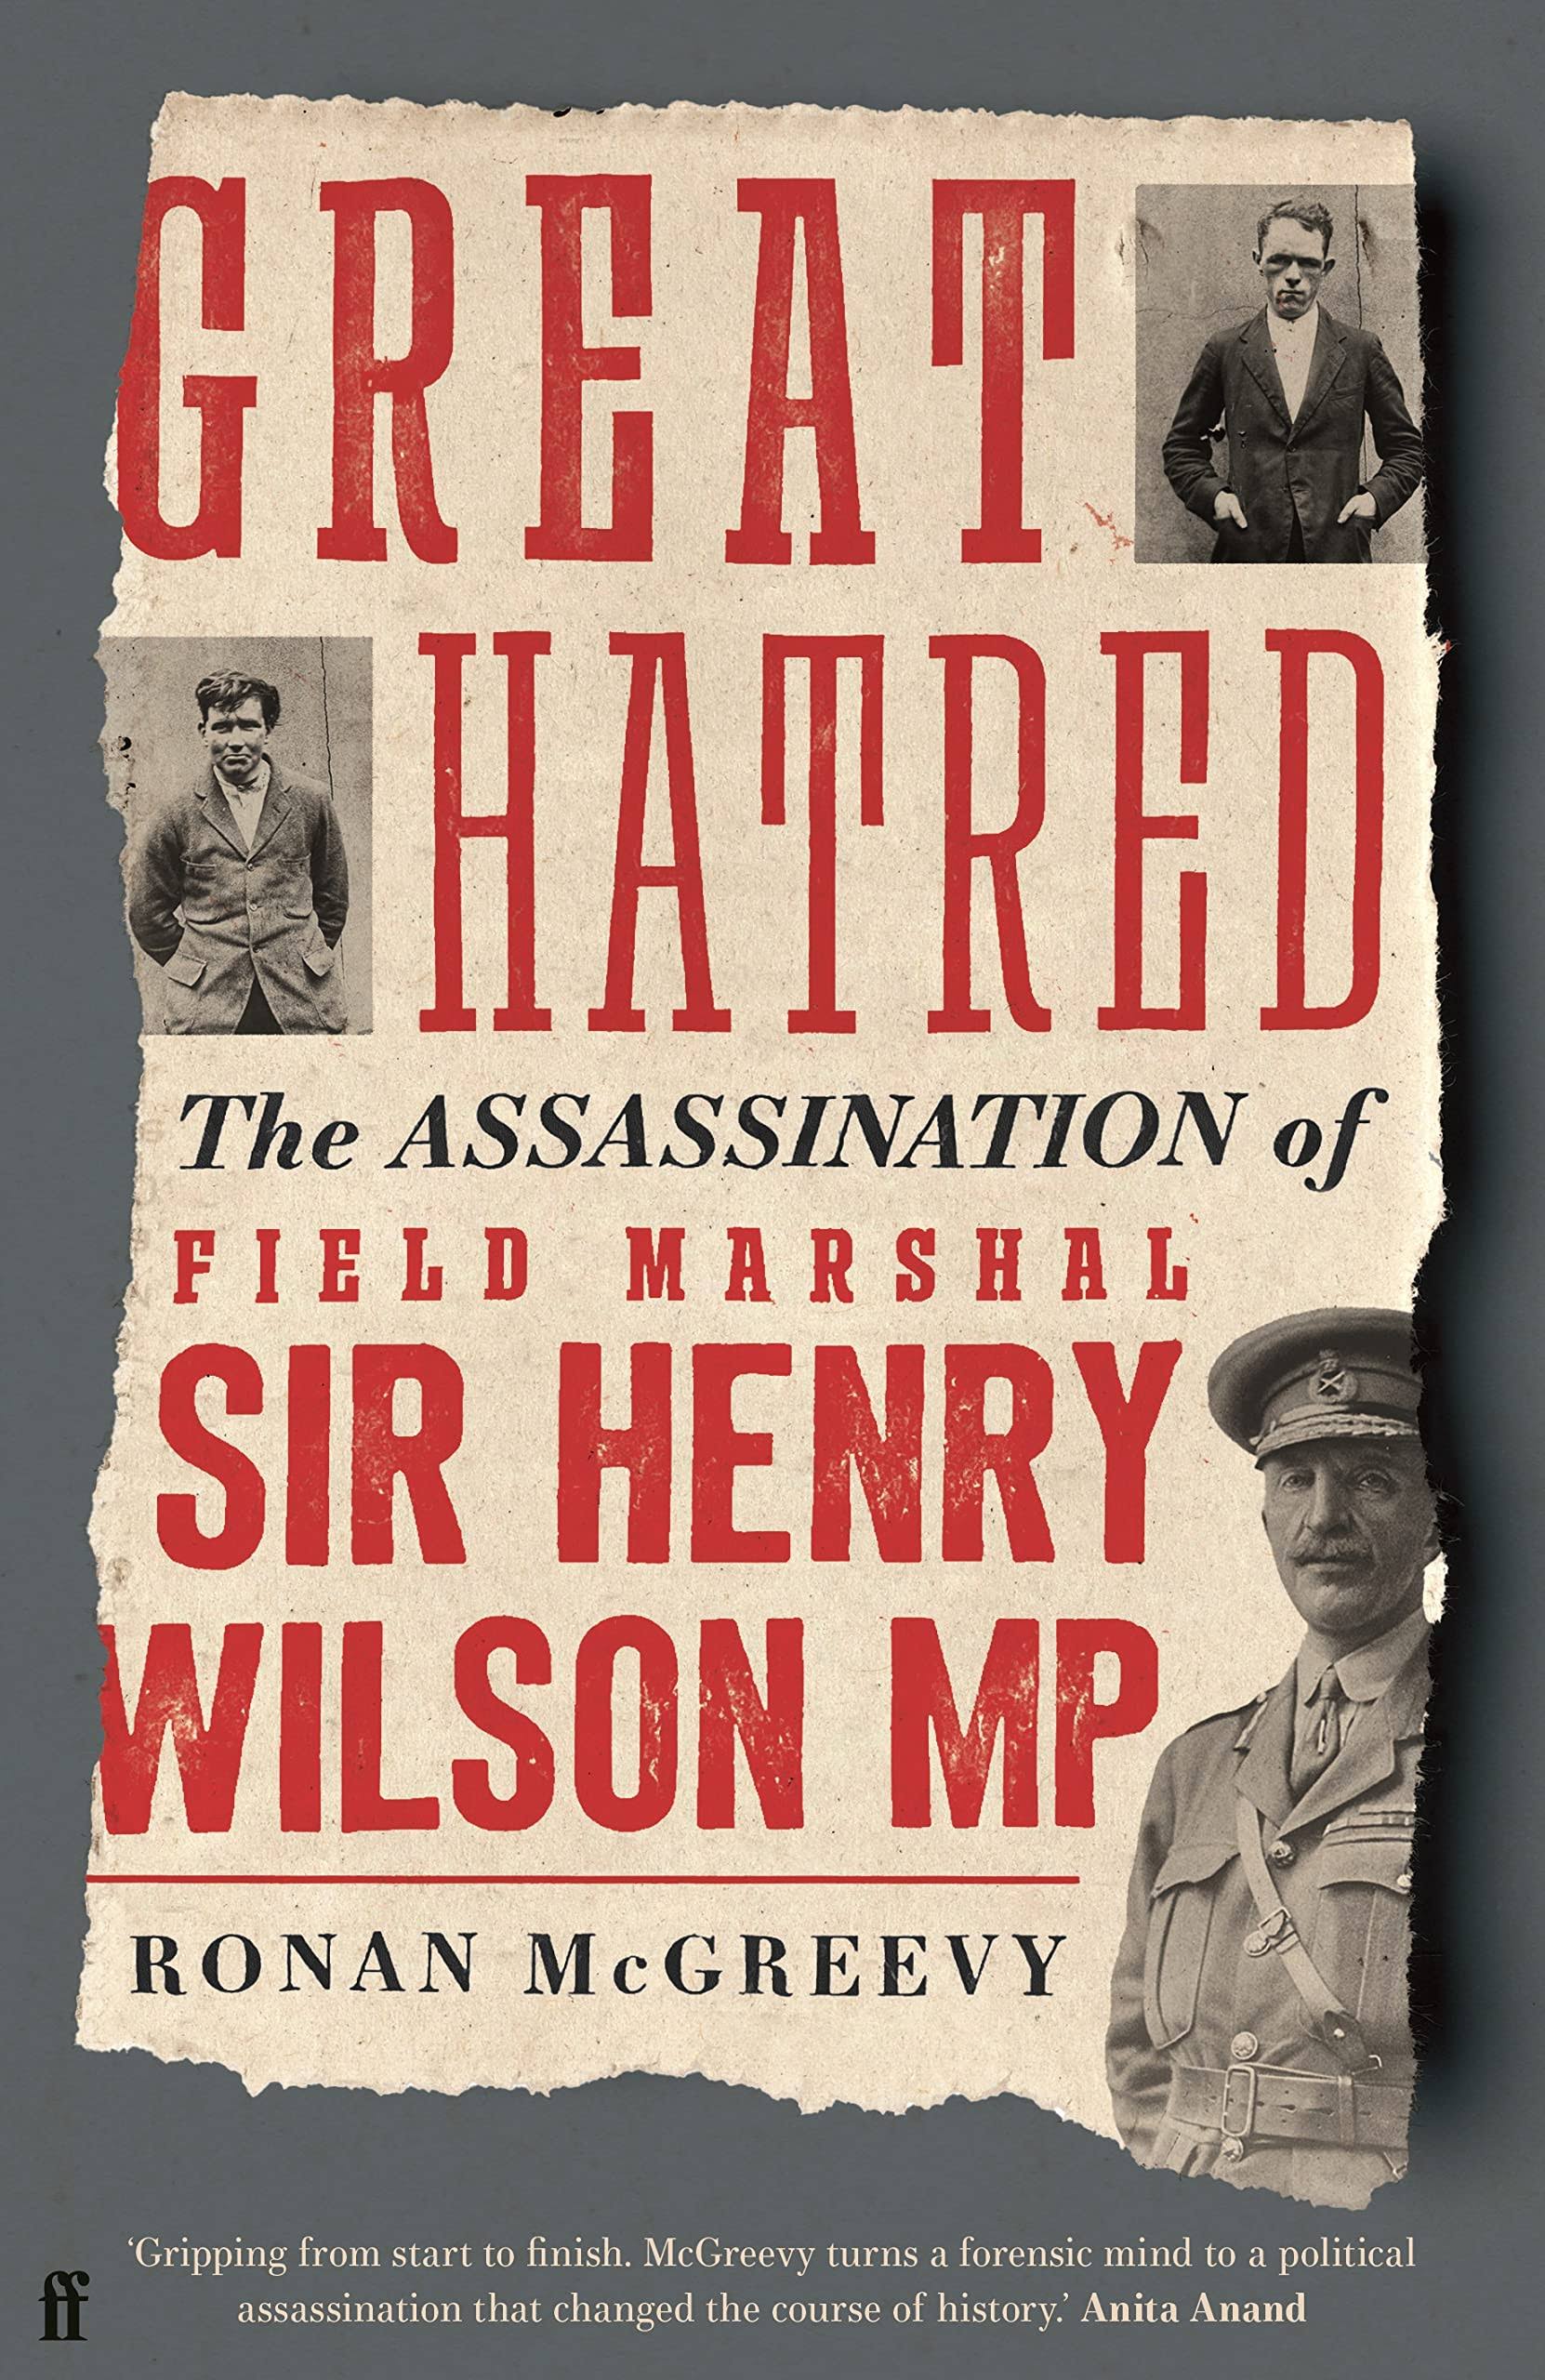 Great Hatred: The Assassination of Field Marshal Sir Henry Wilson MP [Book]